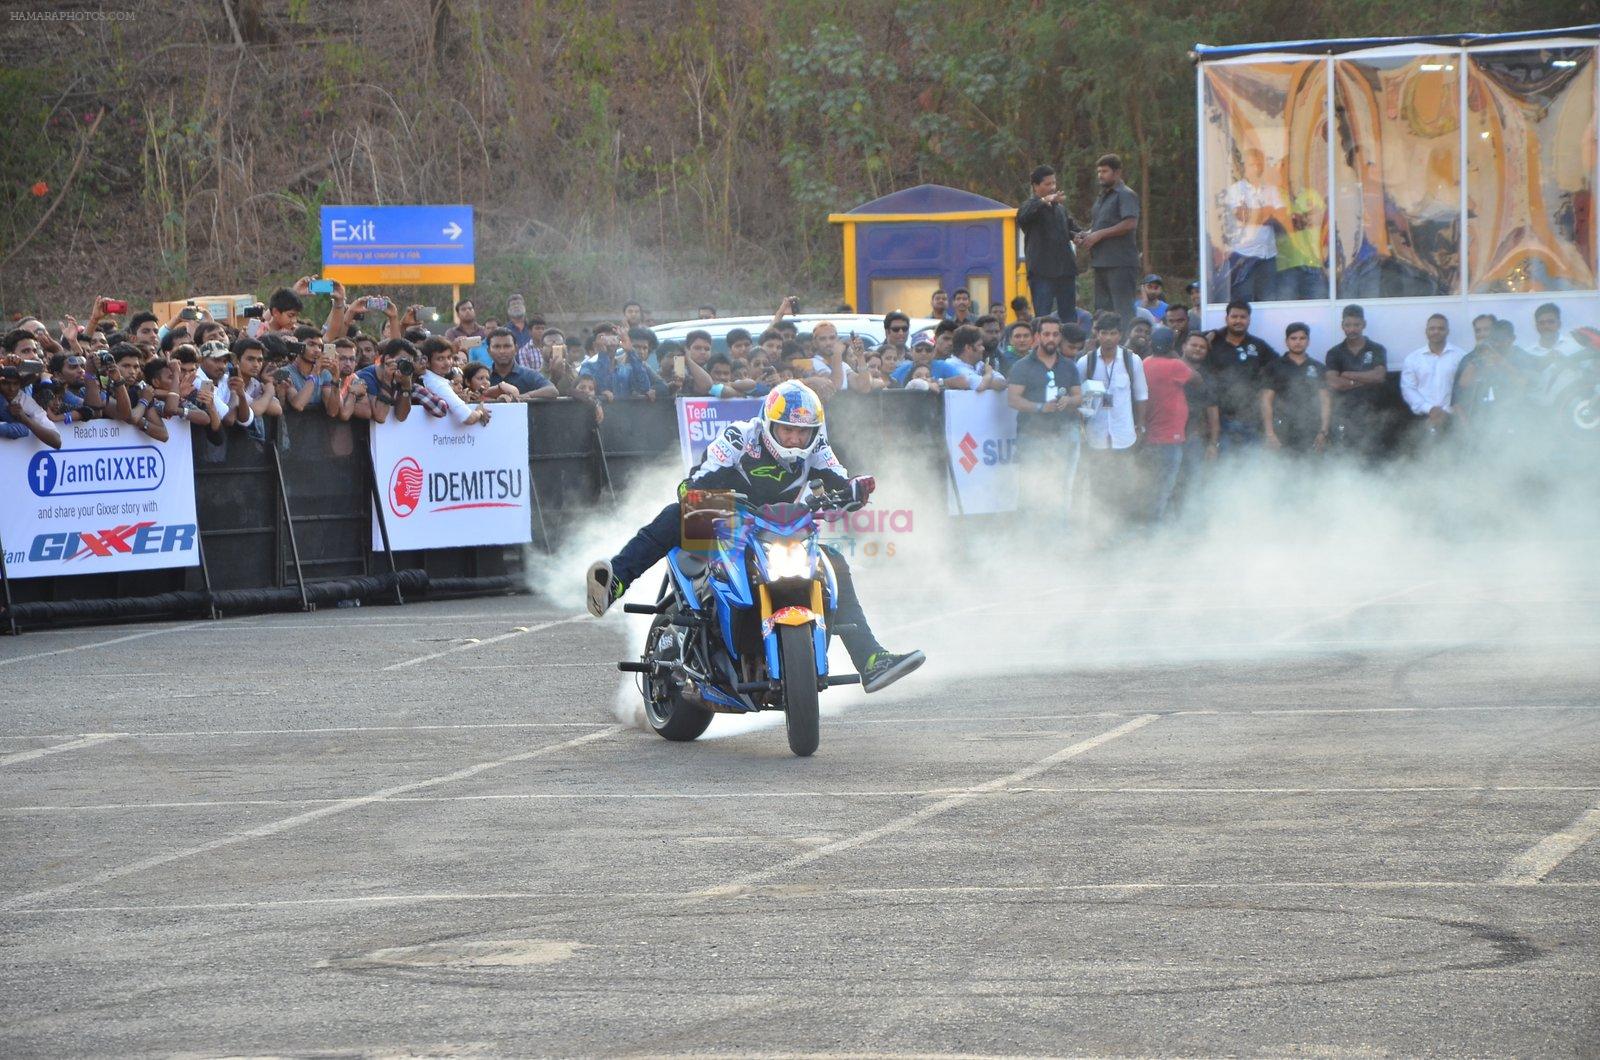 at bike stunt event in Mumbai on 14th May 2016